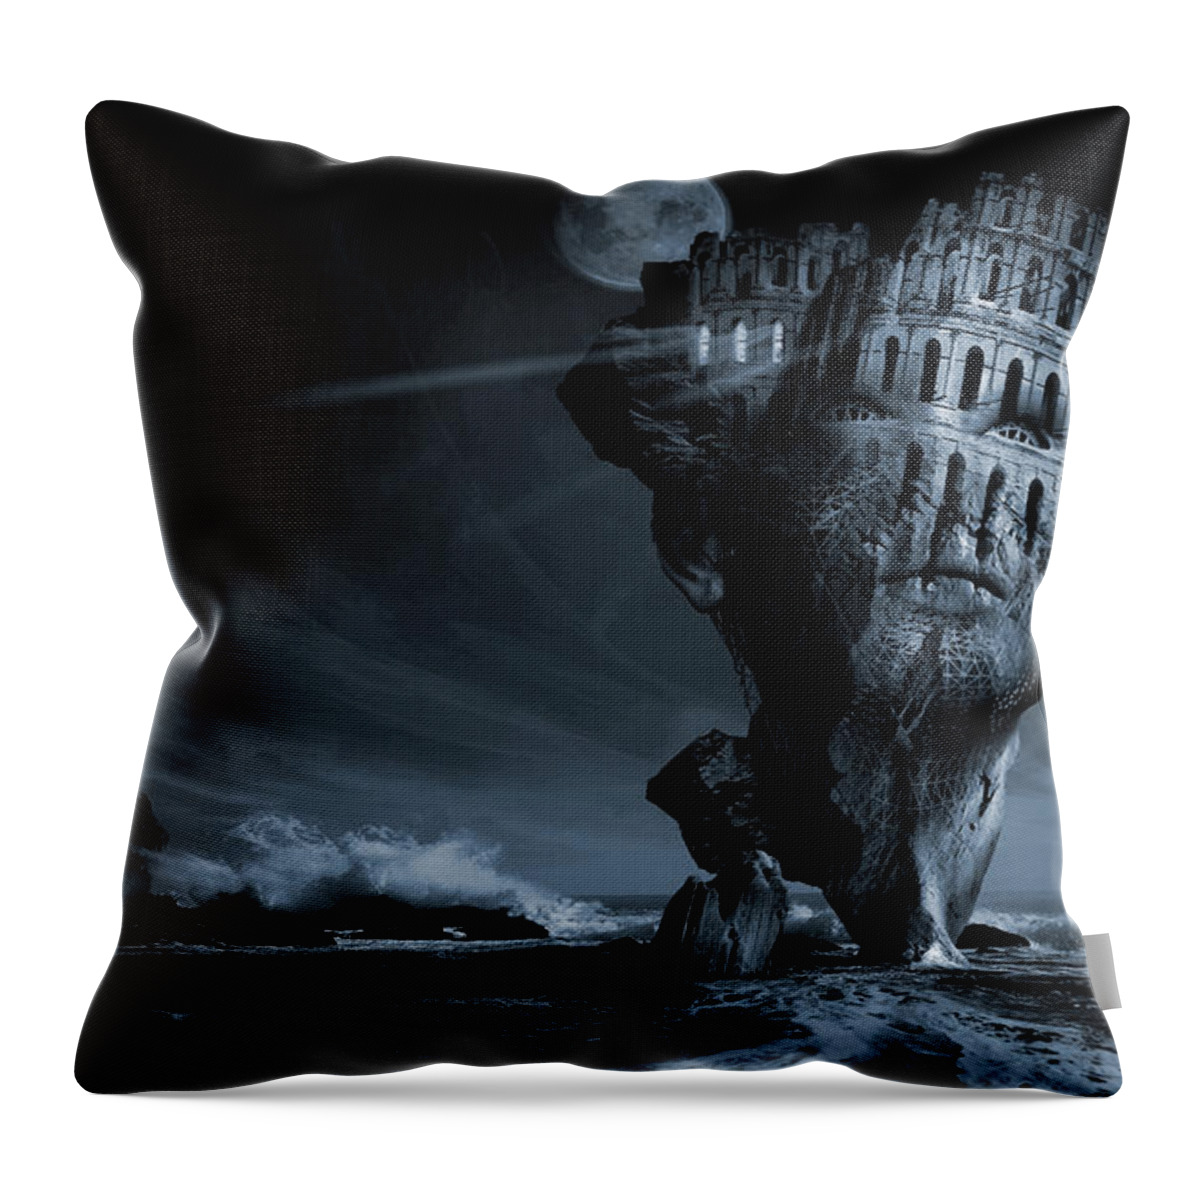 Romantic Idealistic Phantasmagoric Digital Poster Limited Edition Giclee Art Print Metaphorical Allegorical Symbolic. Horizon Sea Stone Rock Face Architecture Wave Landscape Scenery Philosophical Thoughtful Idealistic Art Surrealism Digital Picture Blue Photo-manipulation 3d Matte Painting Photography Surreal Surrealistic Throw Pillow featuring the digital art Insomnia or Nocturnal Awakening by George Grie